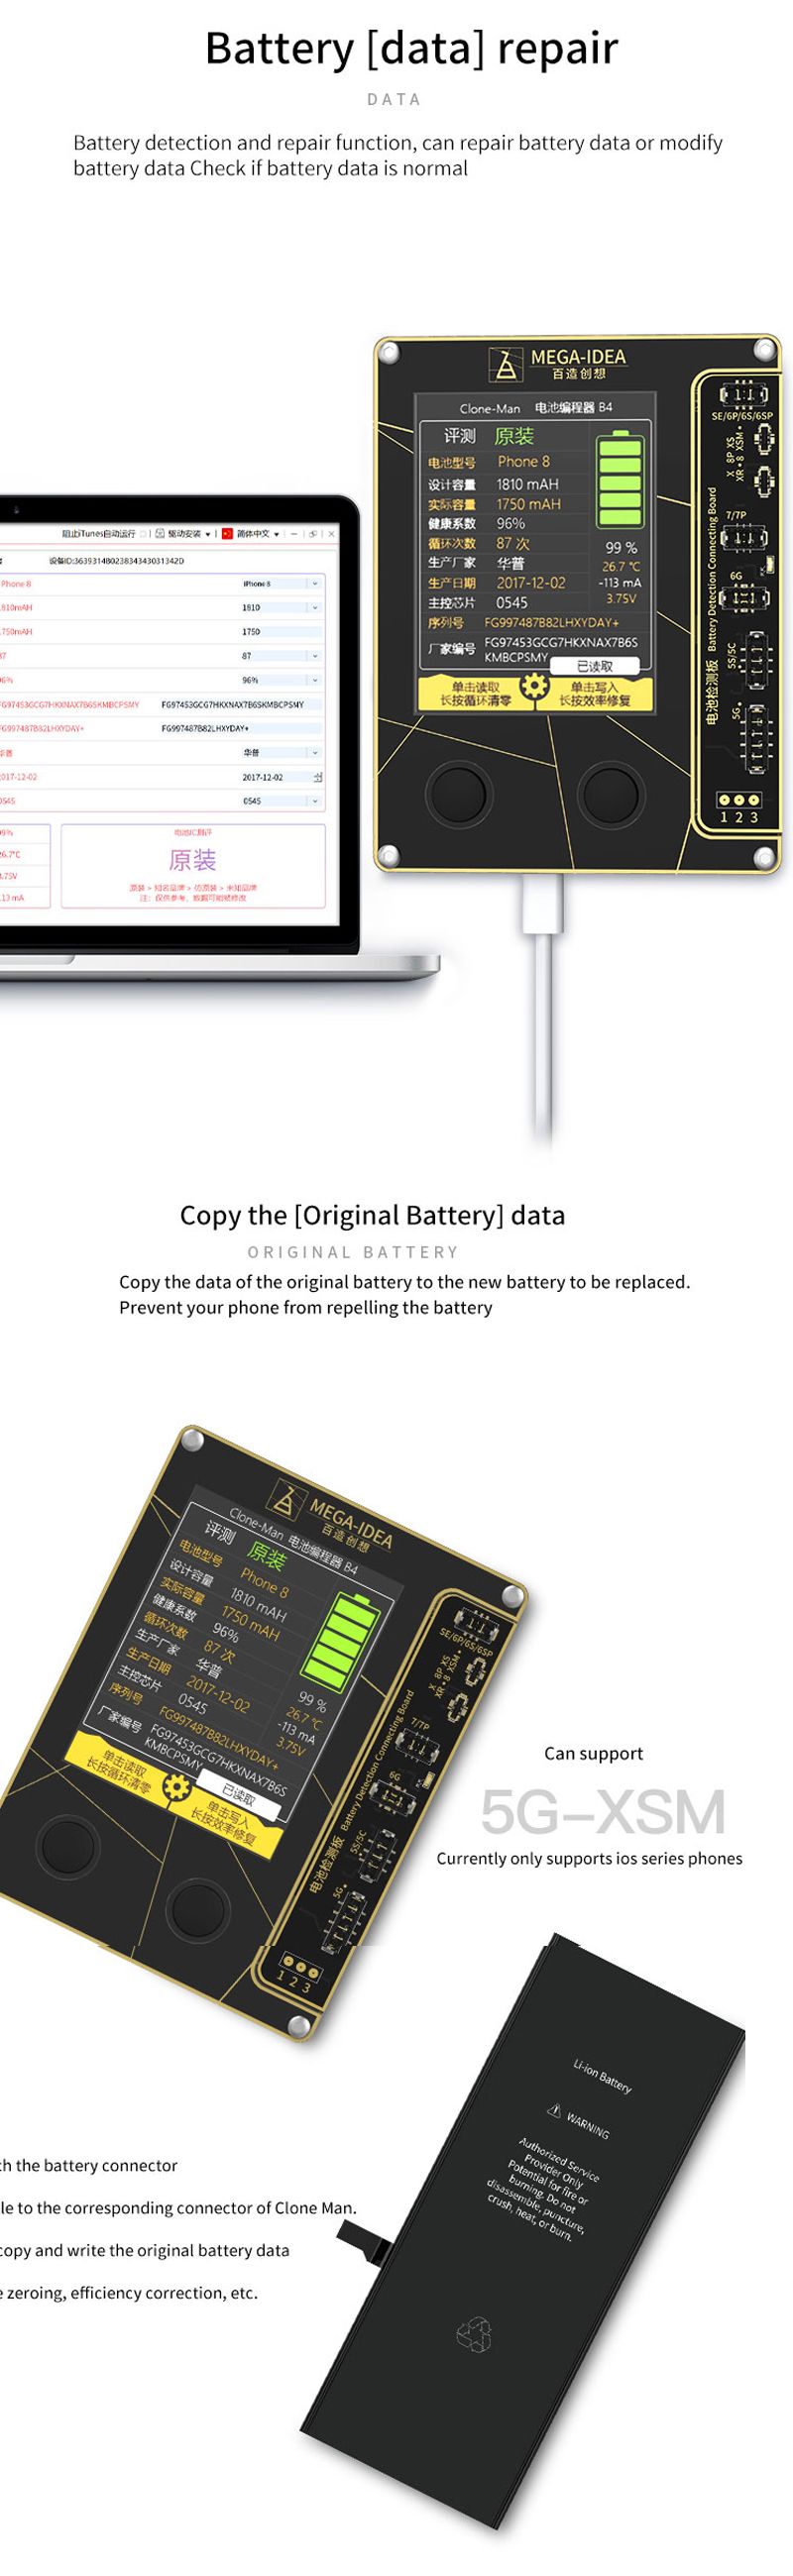 Qianli-Mega-idea-Battery-Programmer-for-Phone-5-6-6s-7-7P-8-X-XS-XS-MAX-Battery-Data-Write-and-Read--1690909